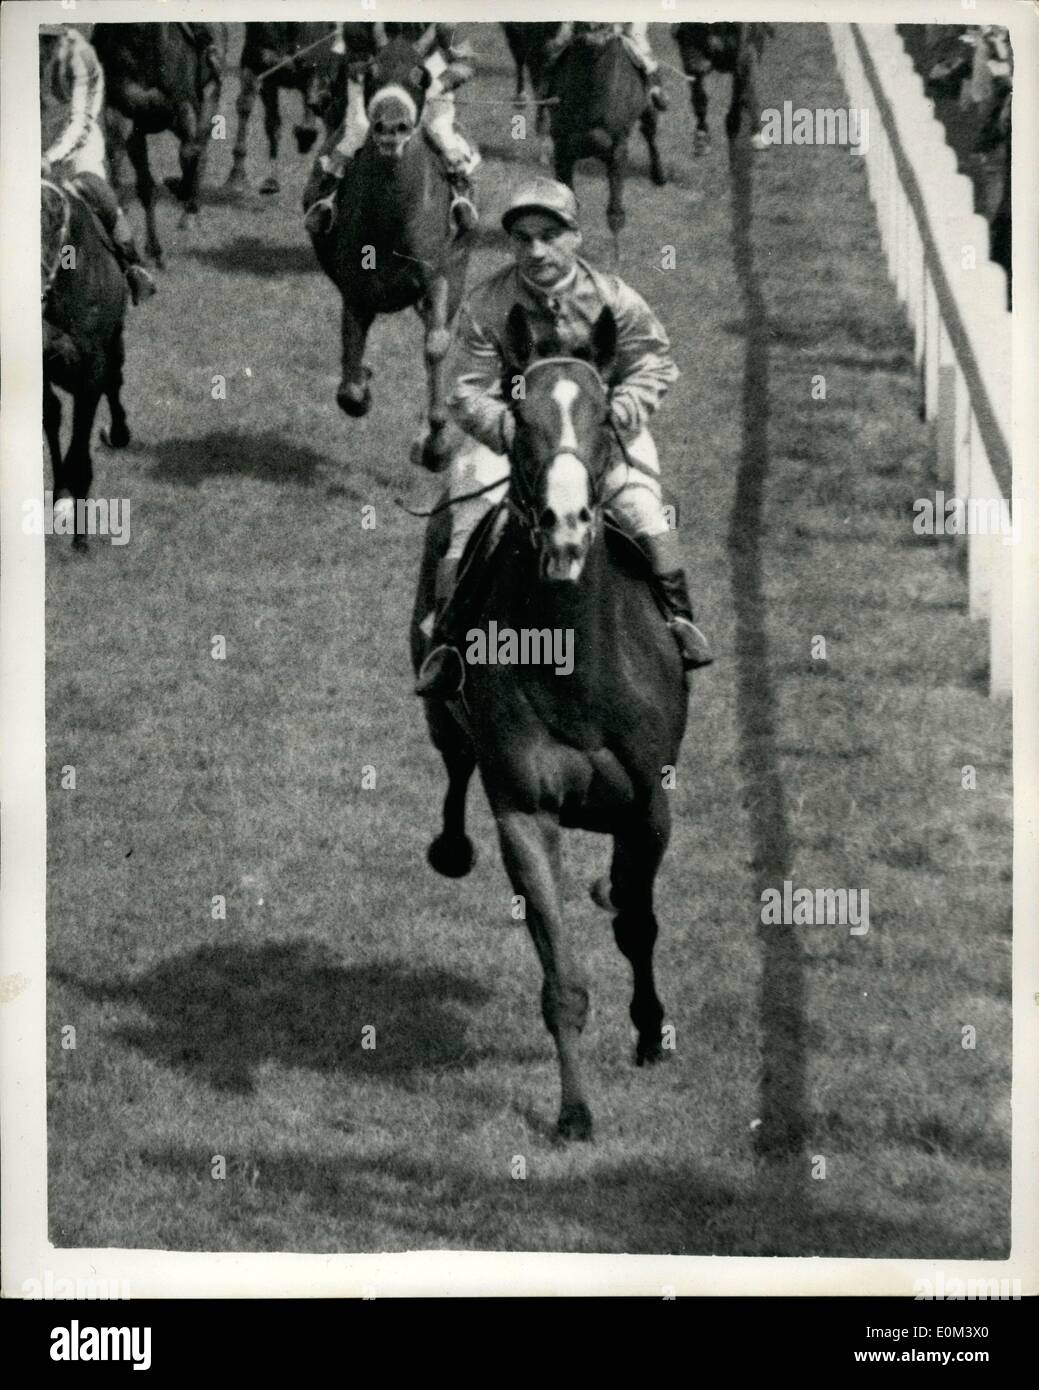 Jun. 06, 1953 - Gordon Richards wins the derby with reins undone. Keystone Photo Shows: Gordon Richards, riding Sir Victor Sassoon's Pinza seen winning the Derby. Something happened which could have cost him the race, it can be seen that the Reins Are Undone. H. Keystone Stock Photo